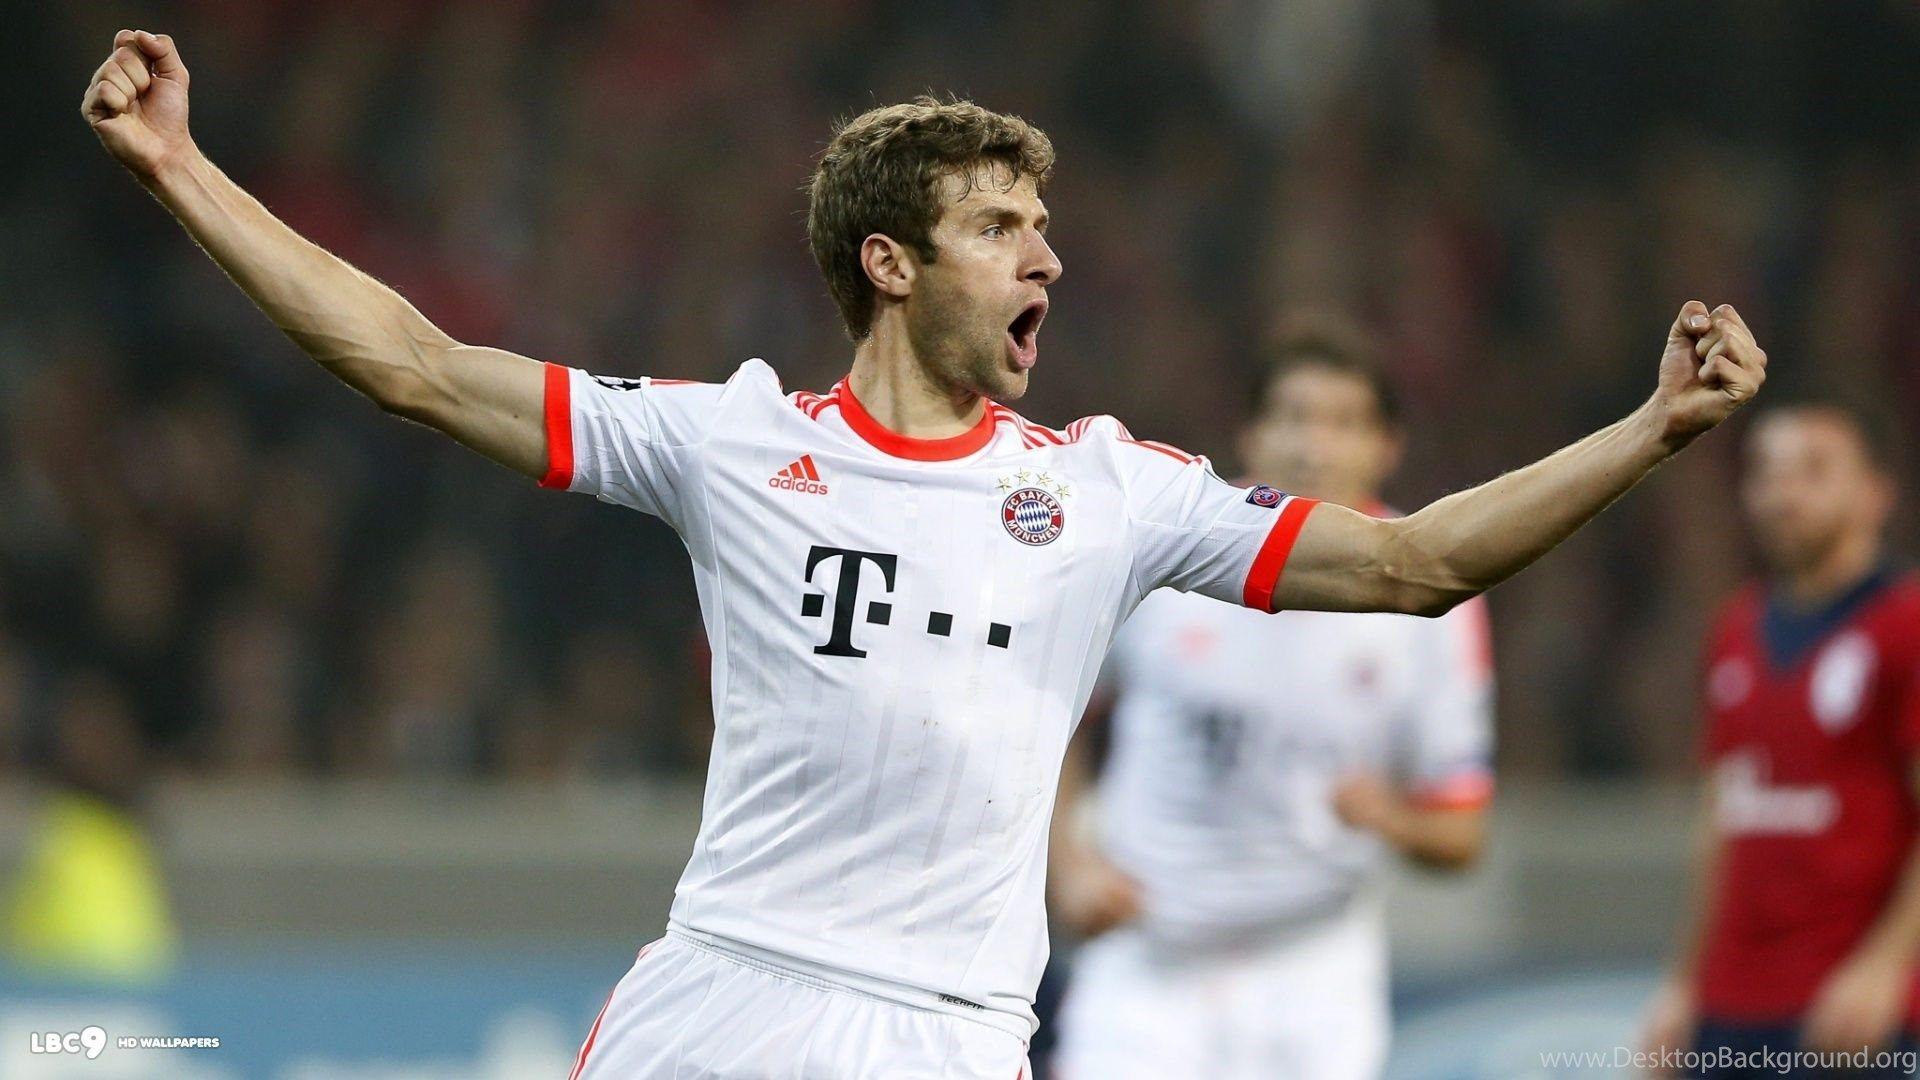 Thomas Muller Wallpaper High Resolution And Quality Download